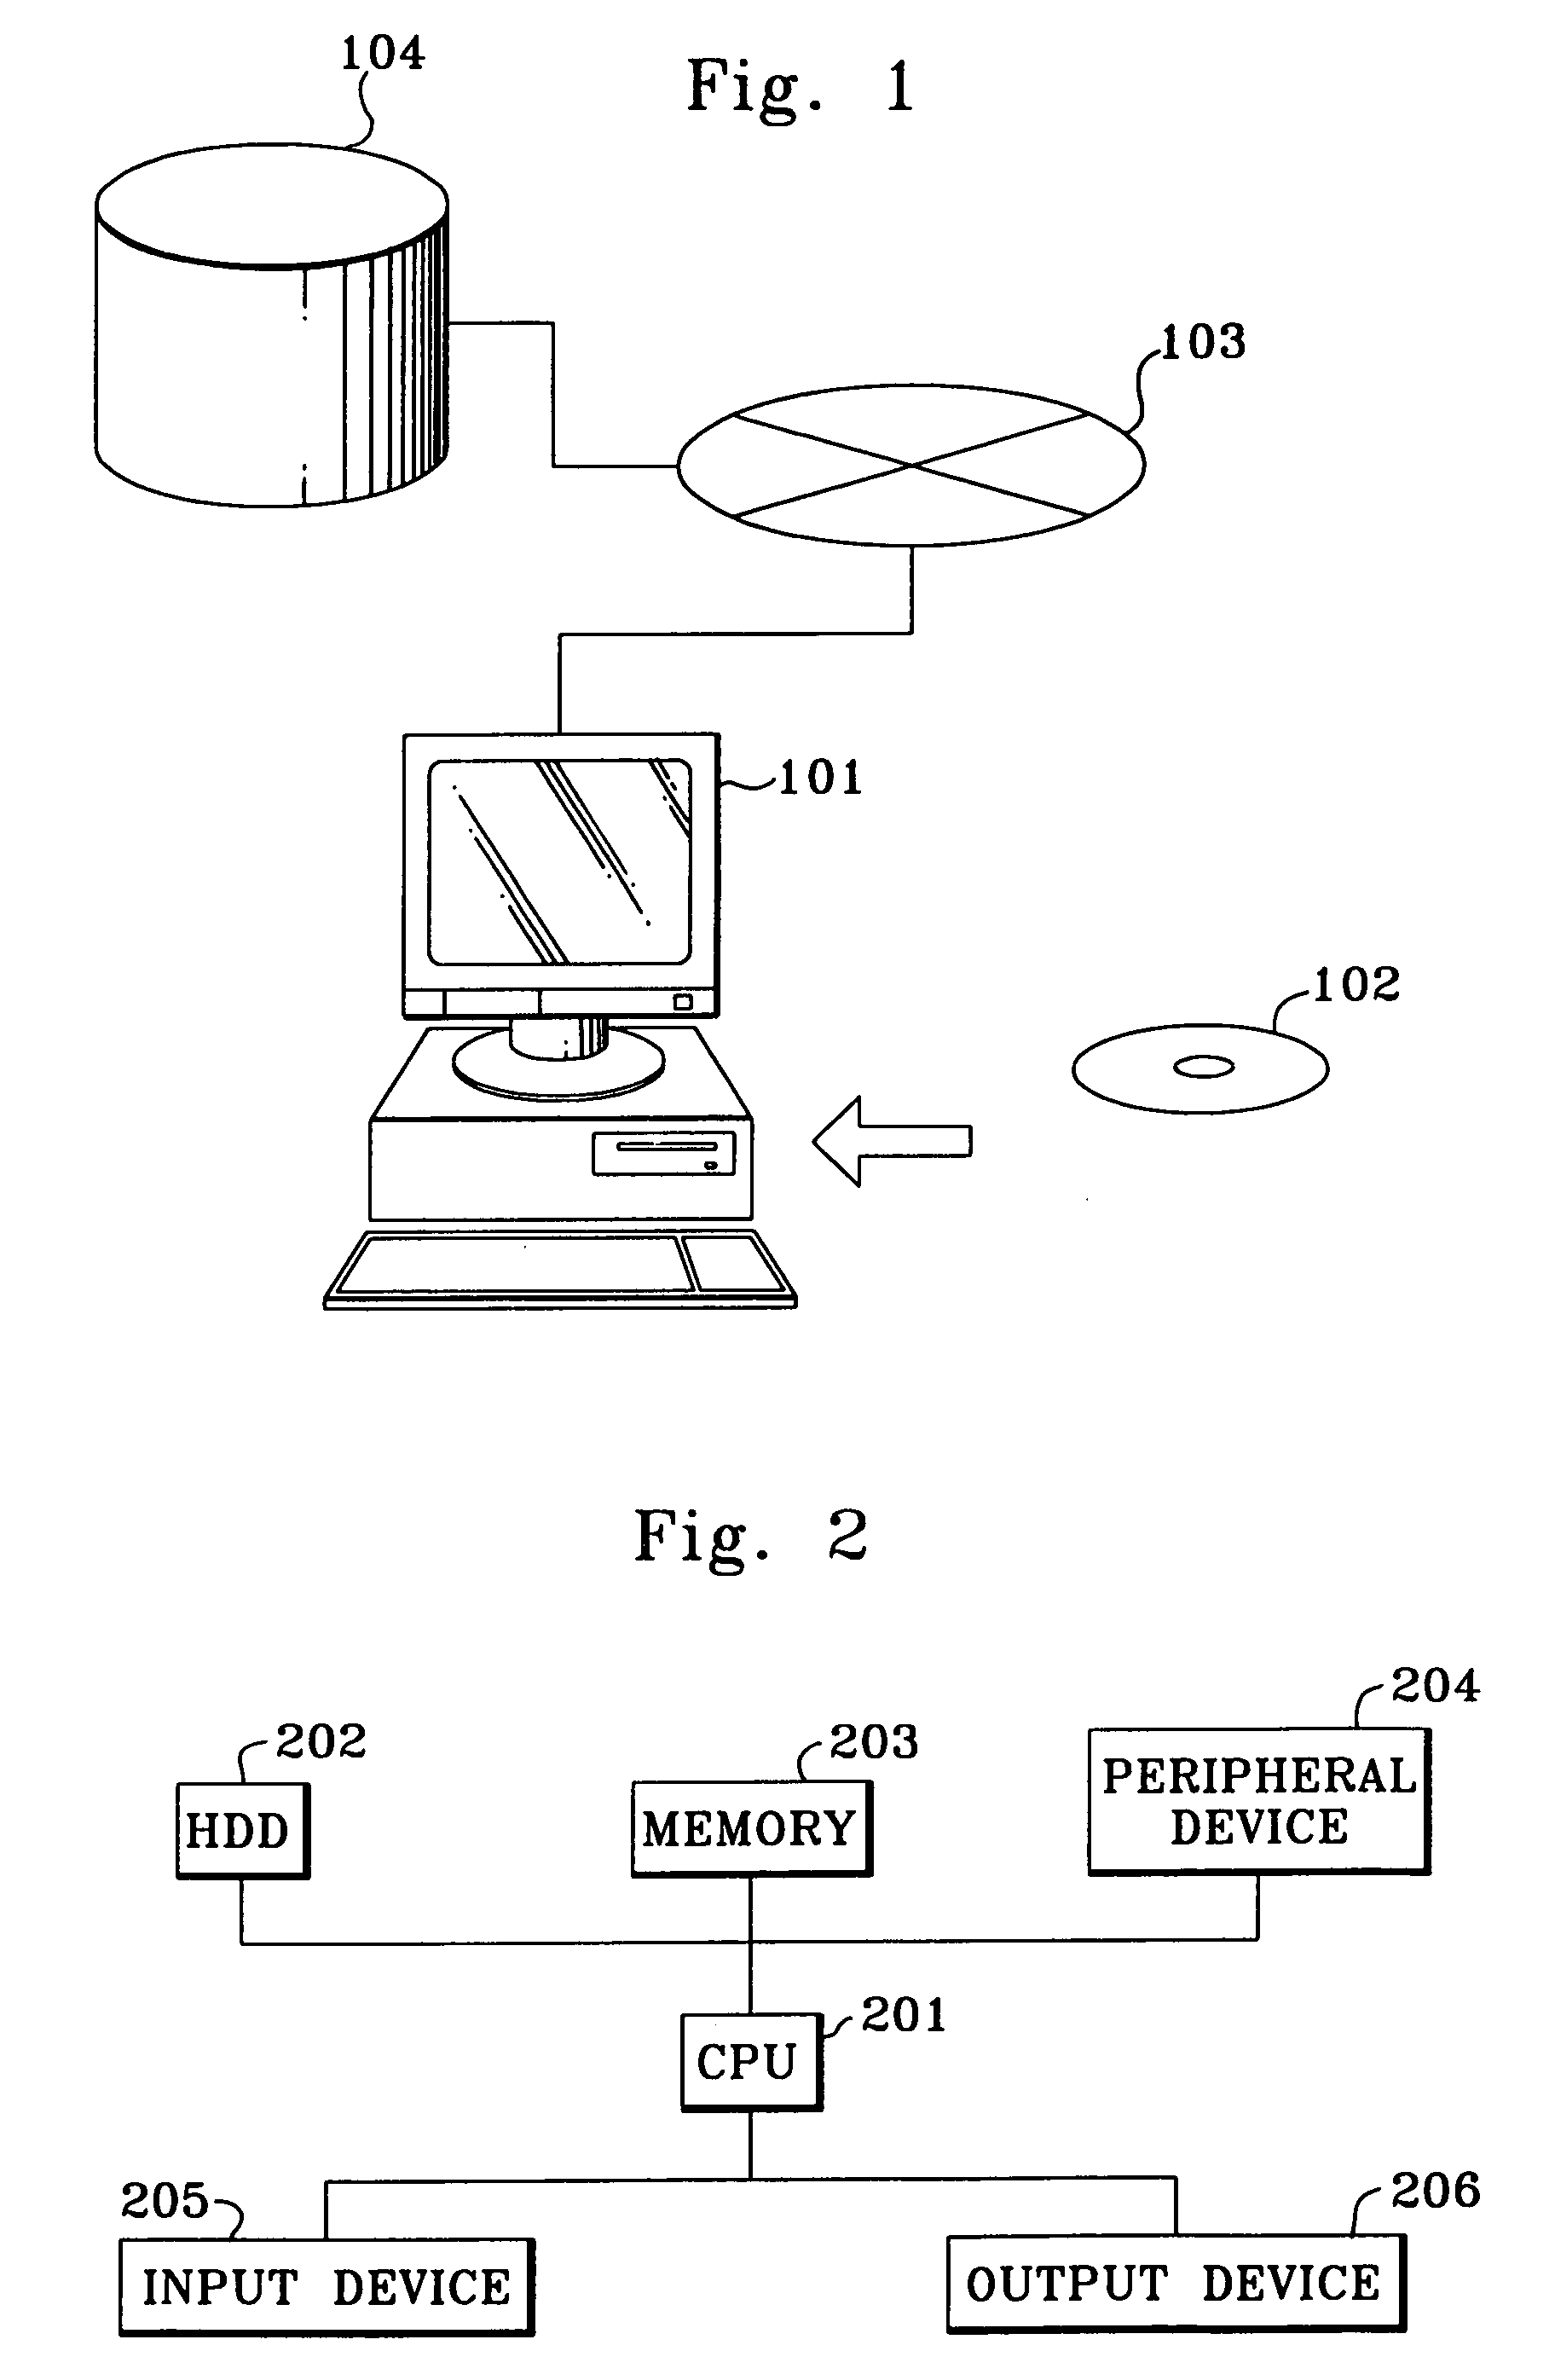 Menu system requiring reduced user manipulation of an input device